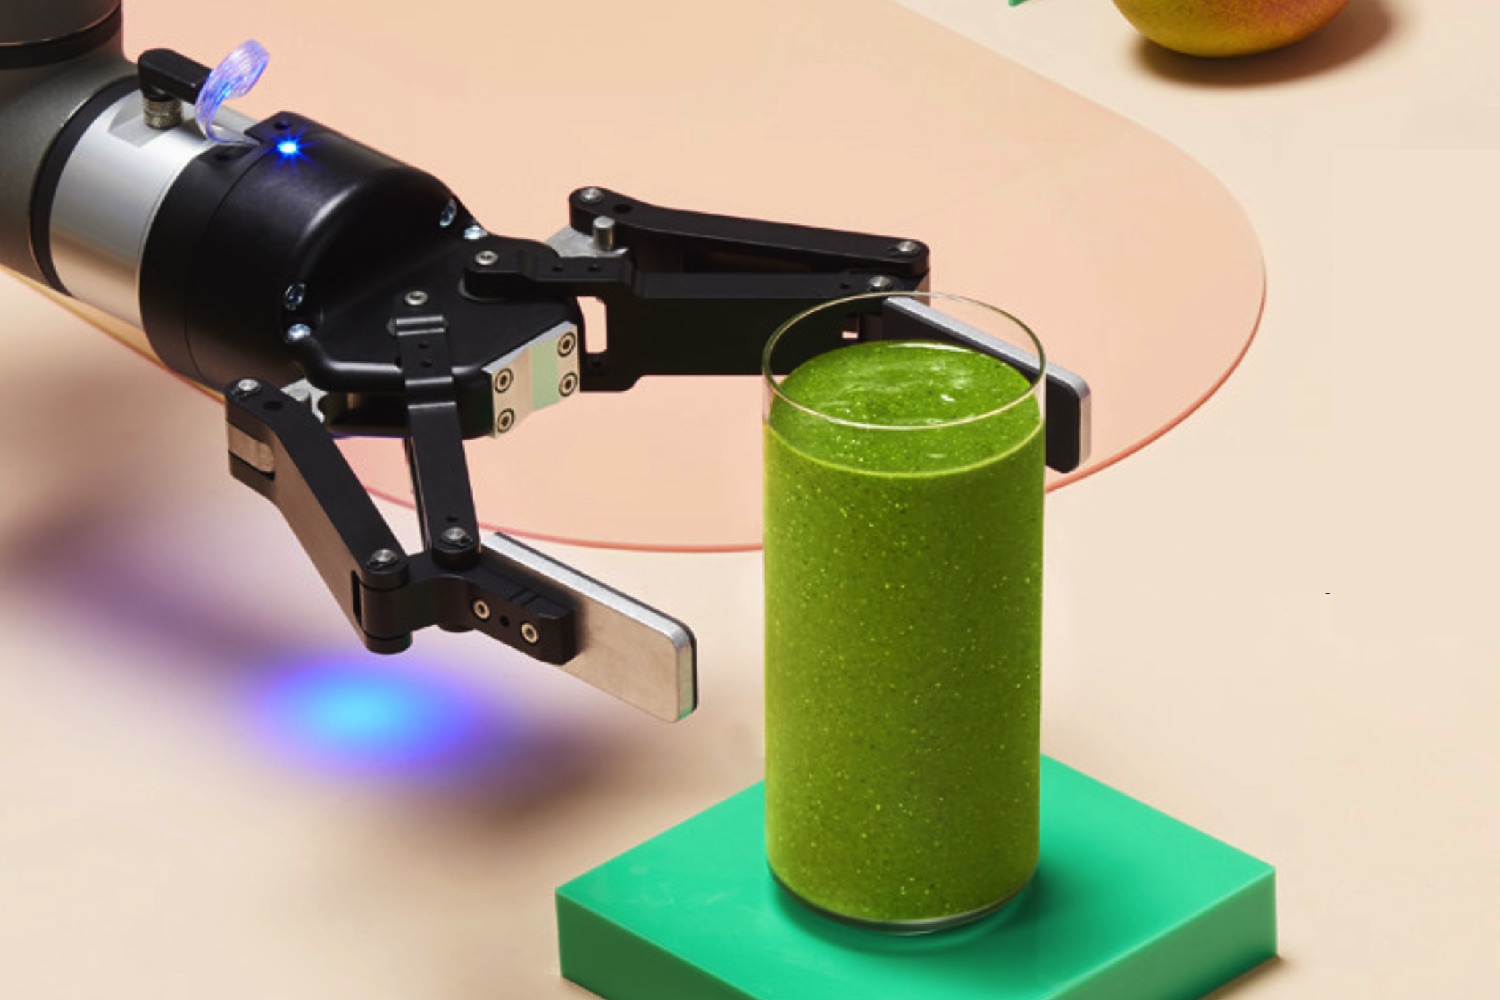 Smoothie-Making Robots are Here to Steal Your Jamba Juice | Digital Trends